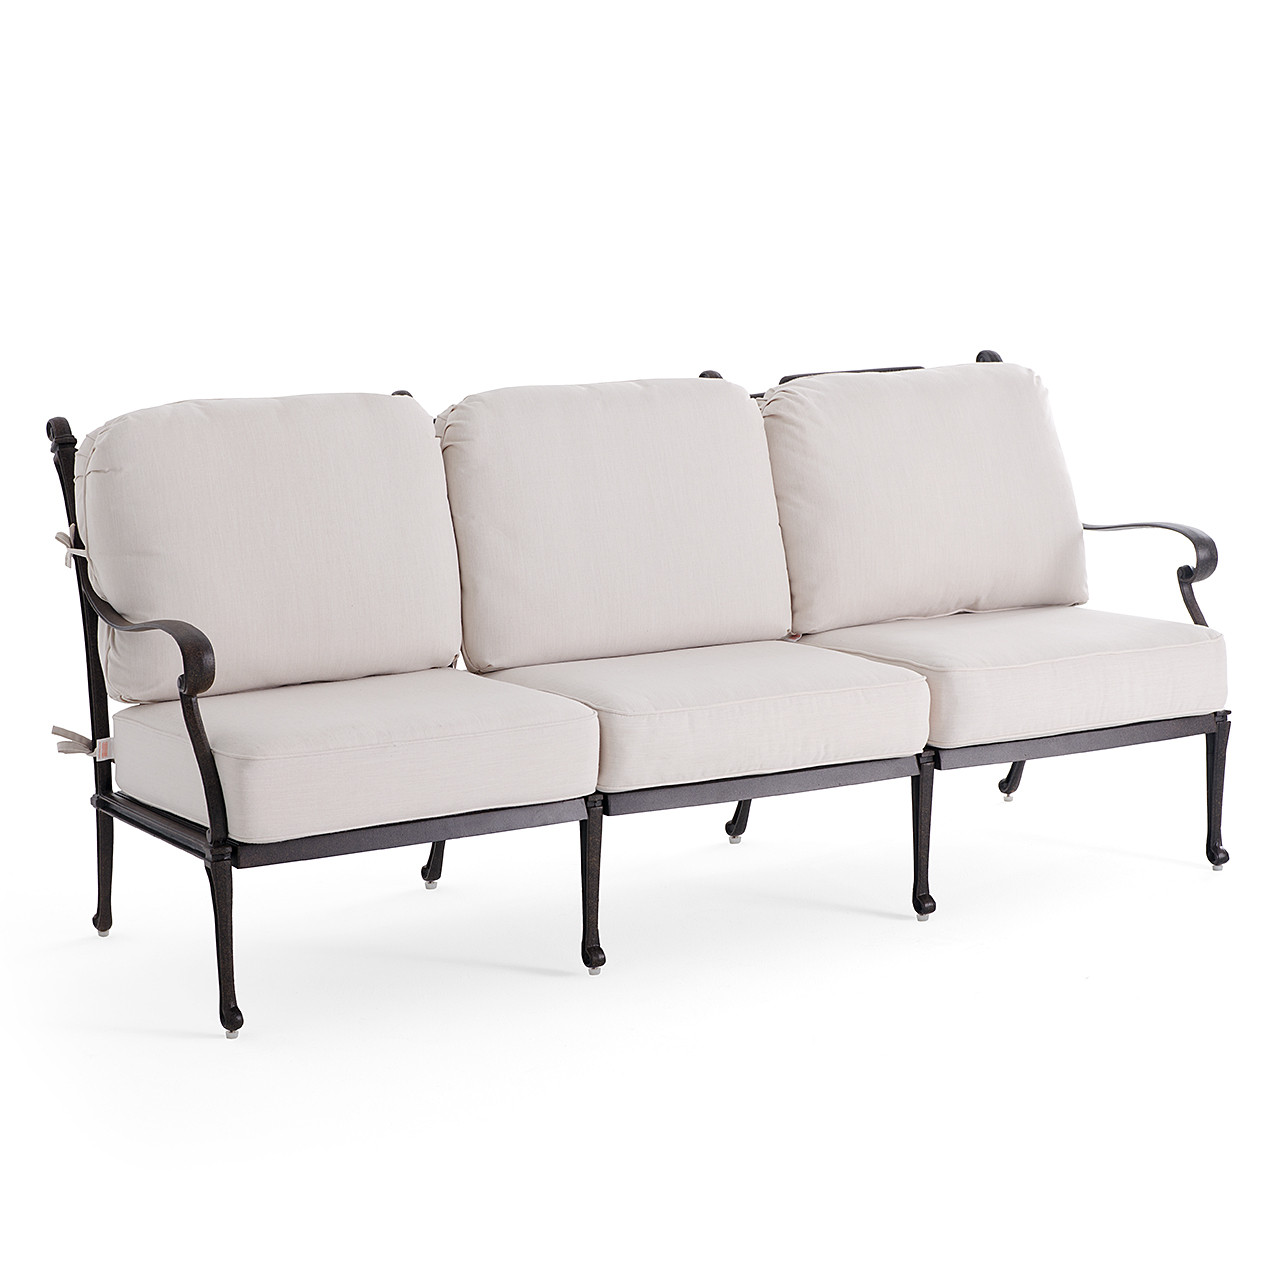 Naples Aged Bronze Cast Aluminum with Estate Cushions 4 Piece Sofa Group + Club Chairs + 45 x 24 in. Coffee Table